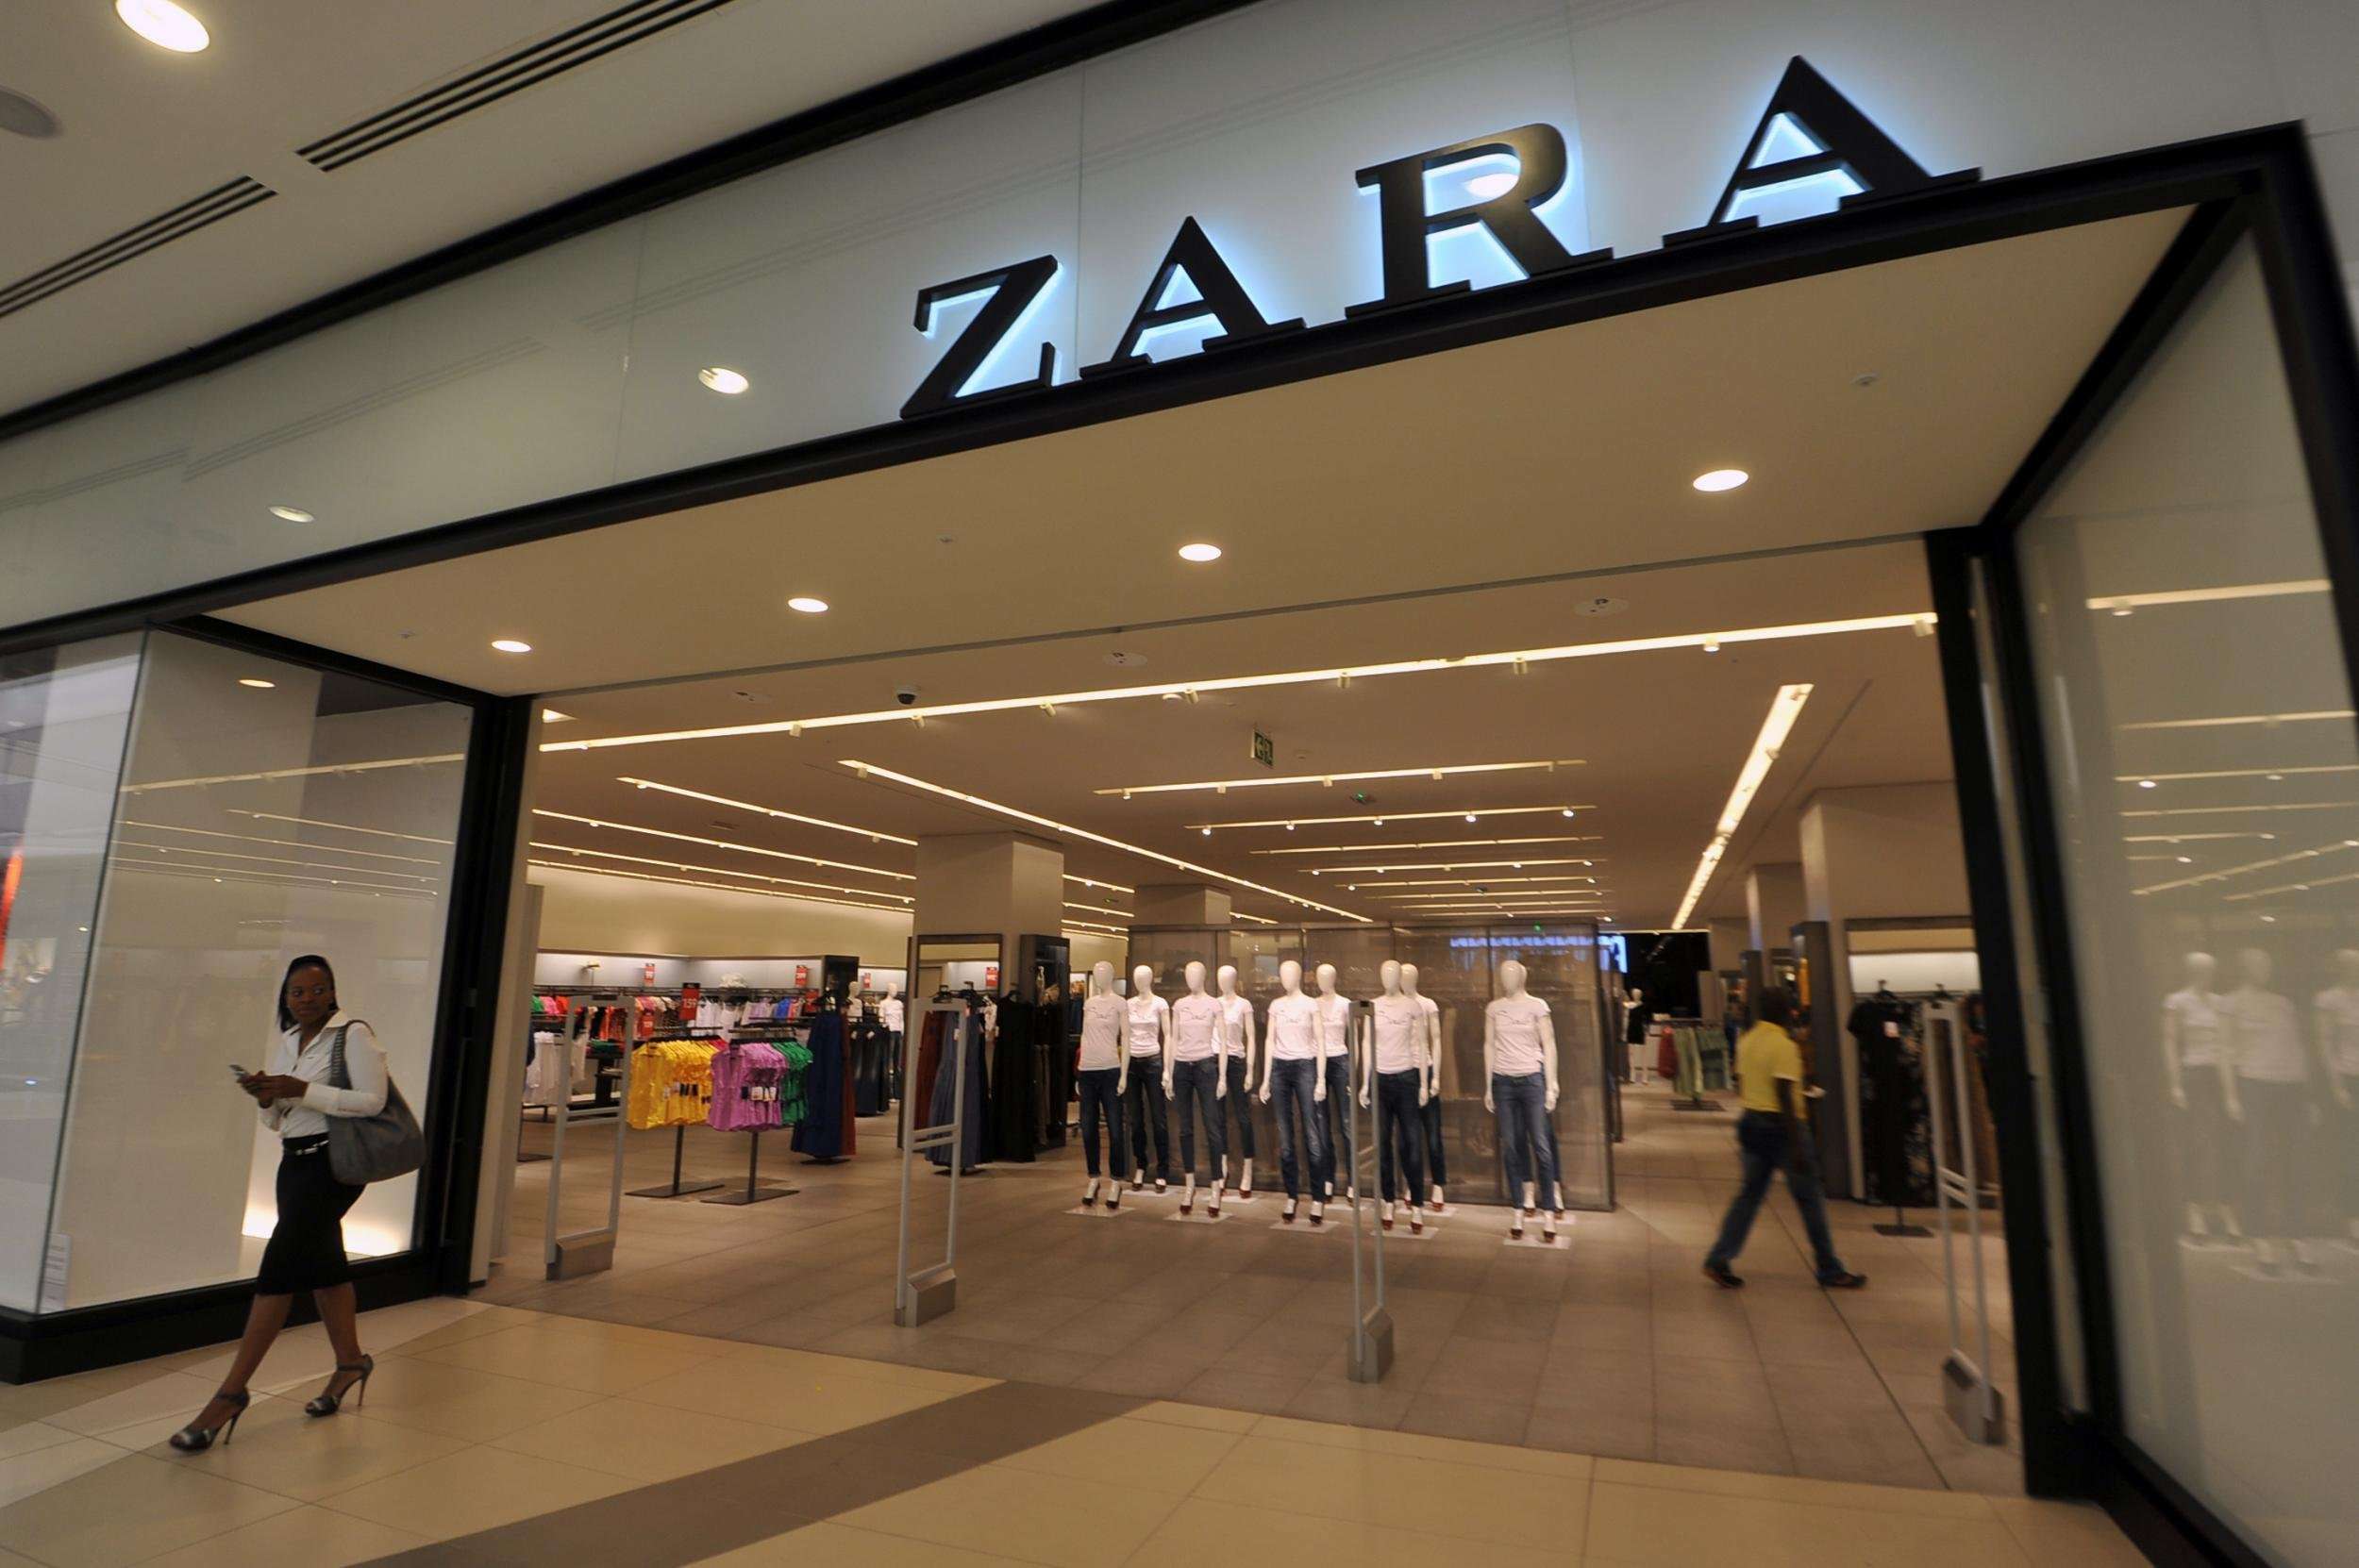 image for Unpaid labourers are 'slipping pleas for help into Zara clothes'